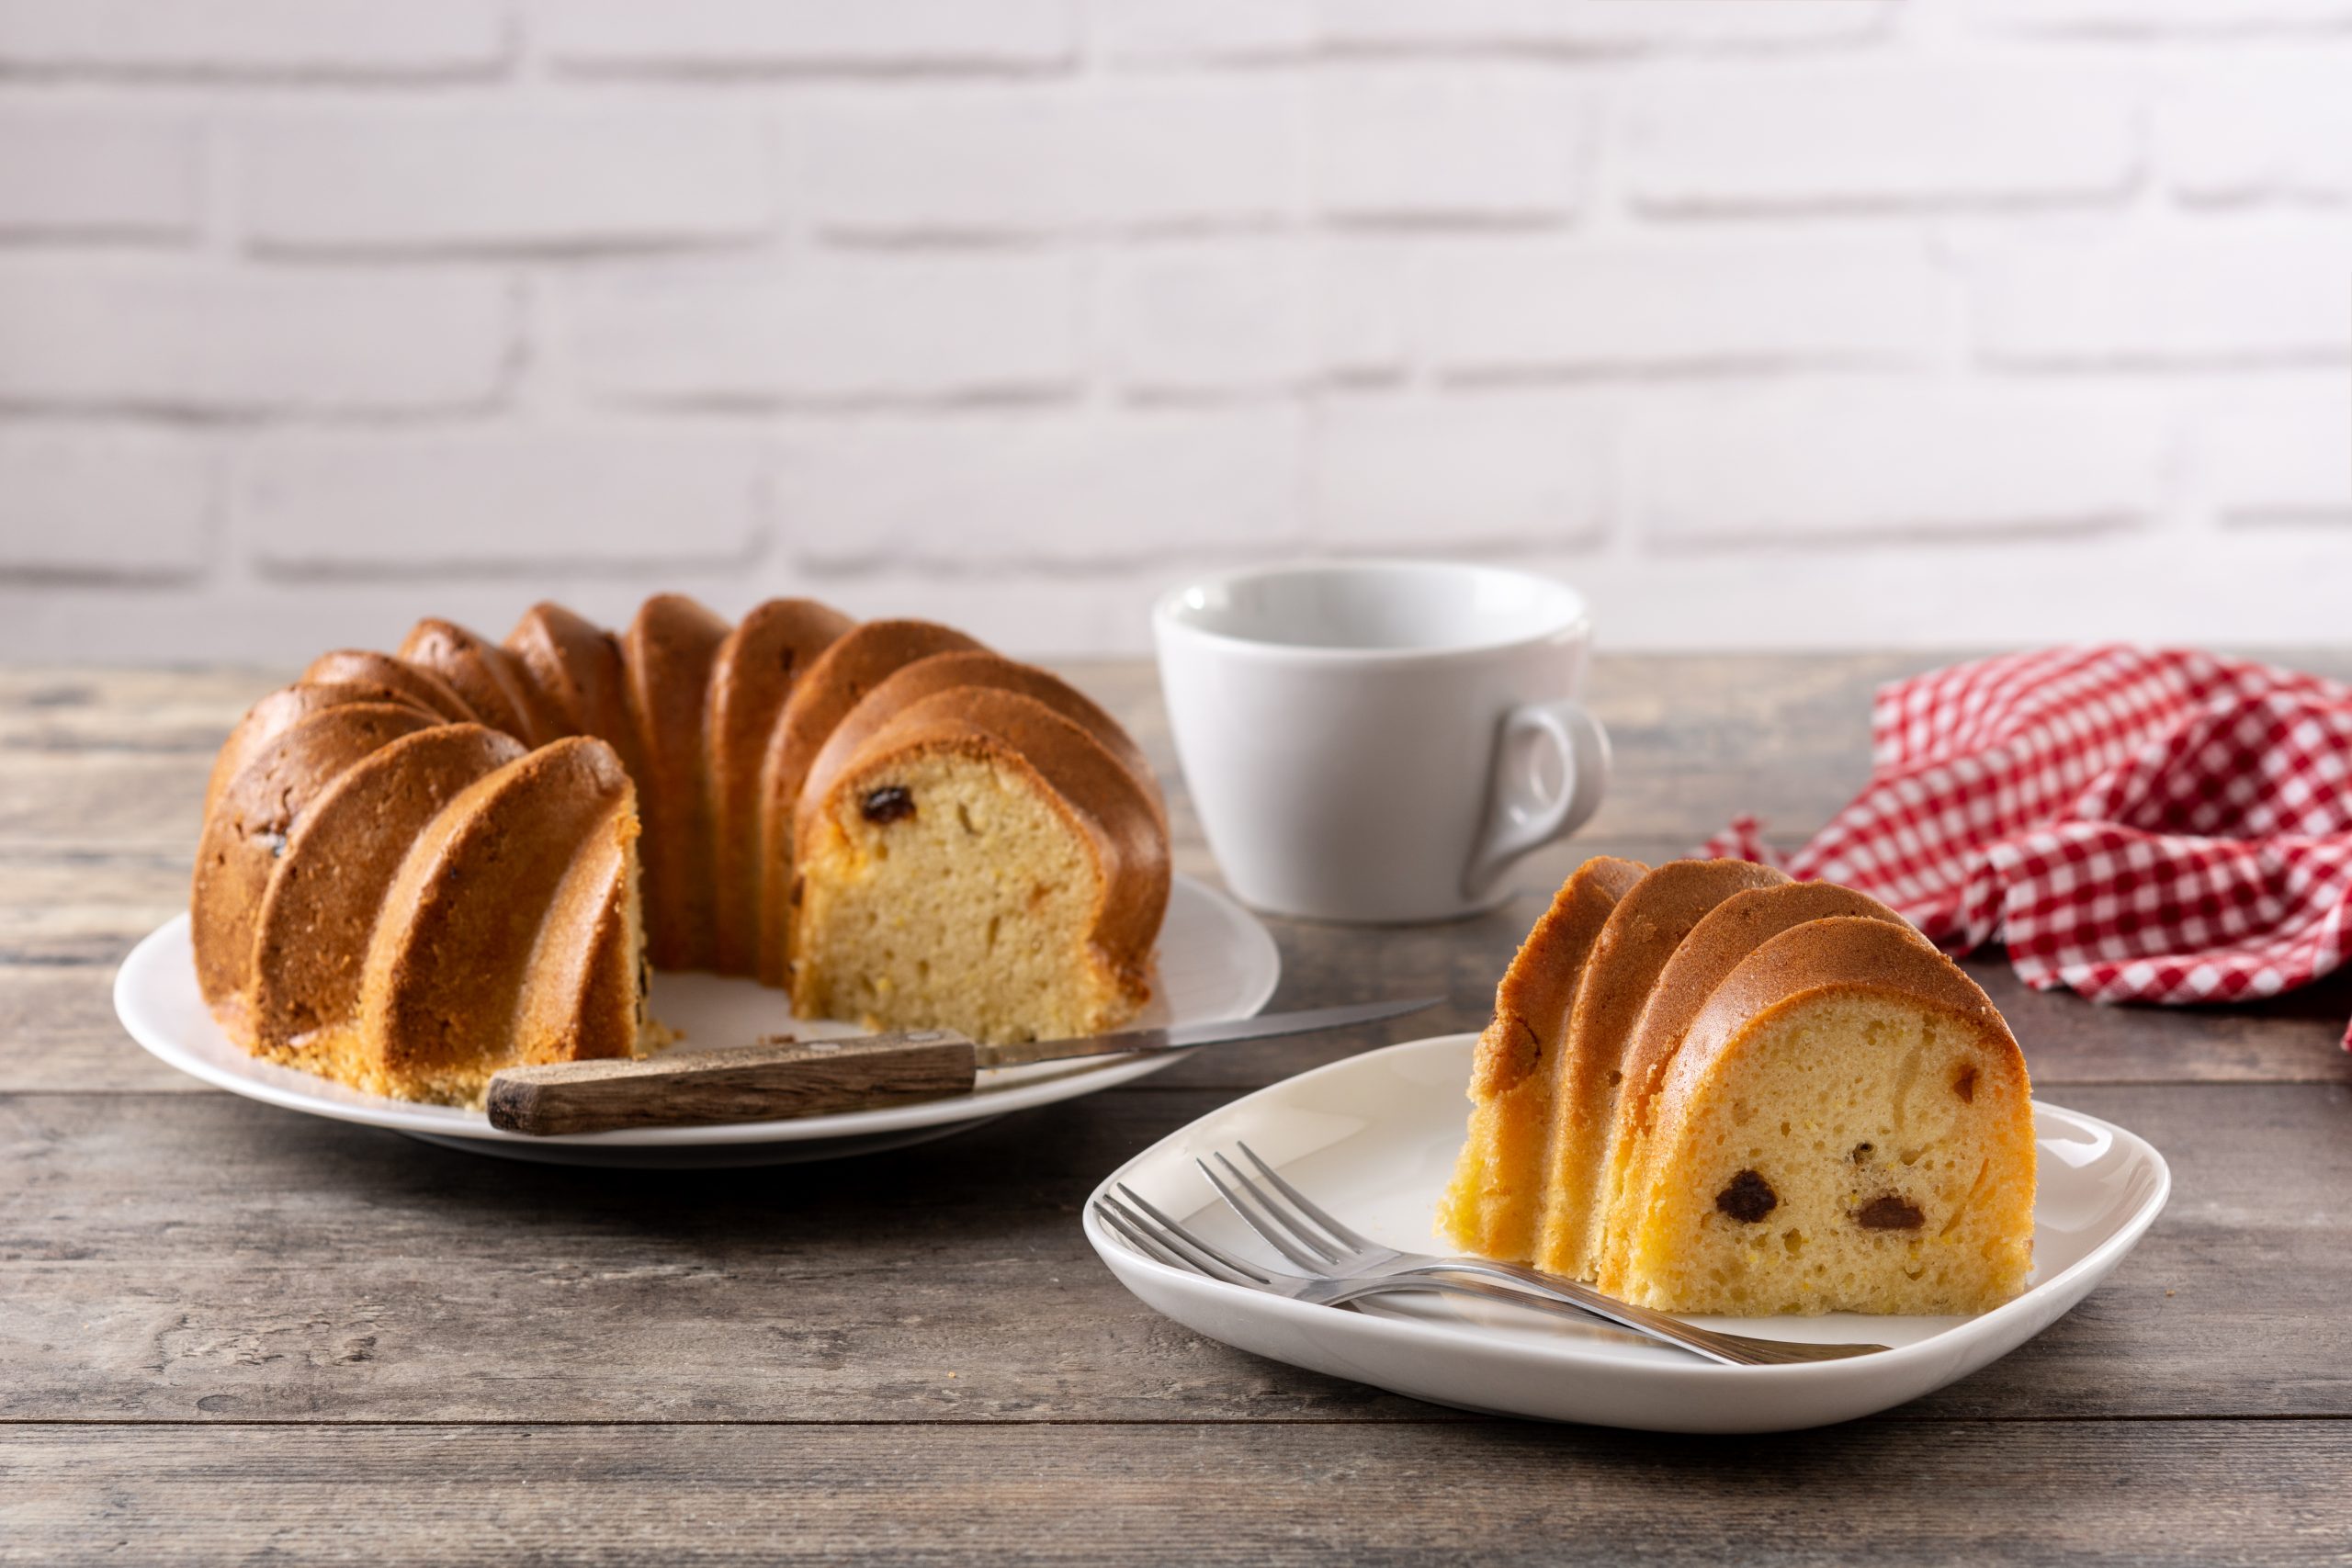 traditional-bundt-cake-piece-with-raisins-wooden-table-scaled.jpg